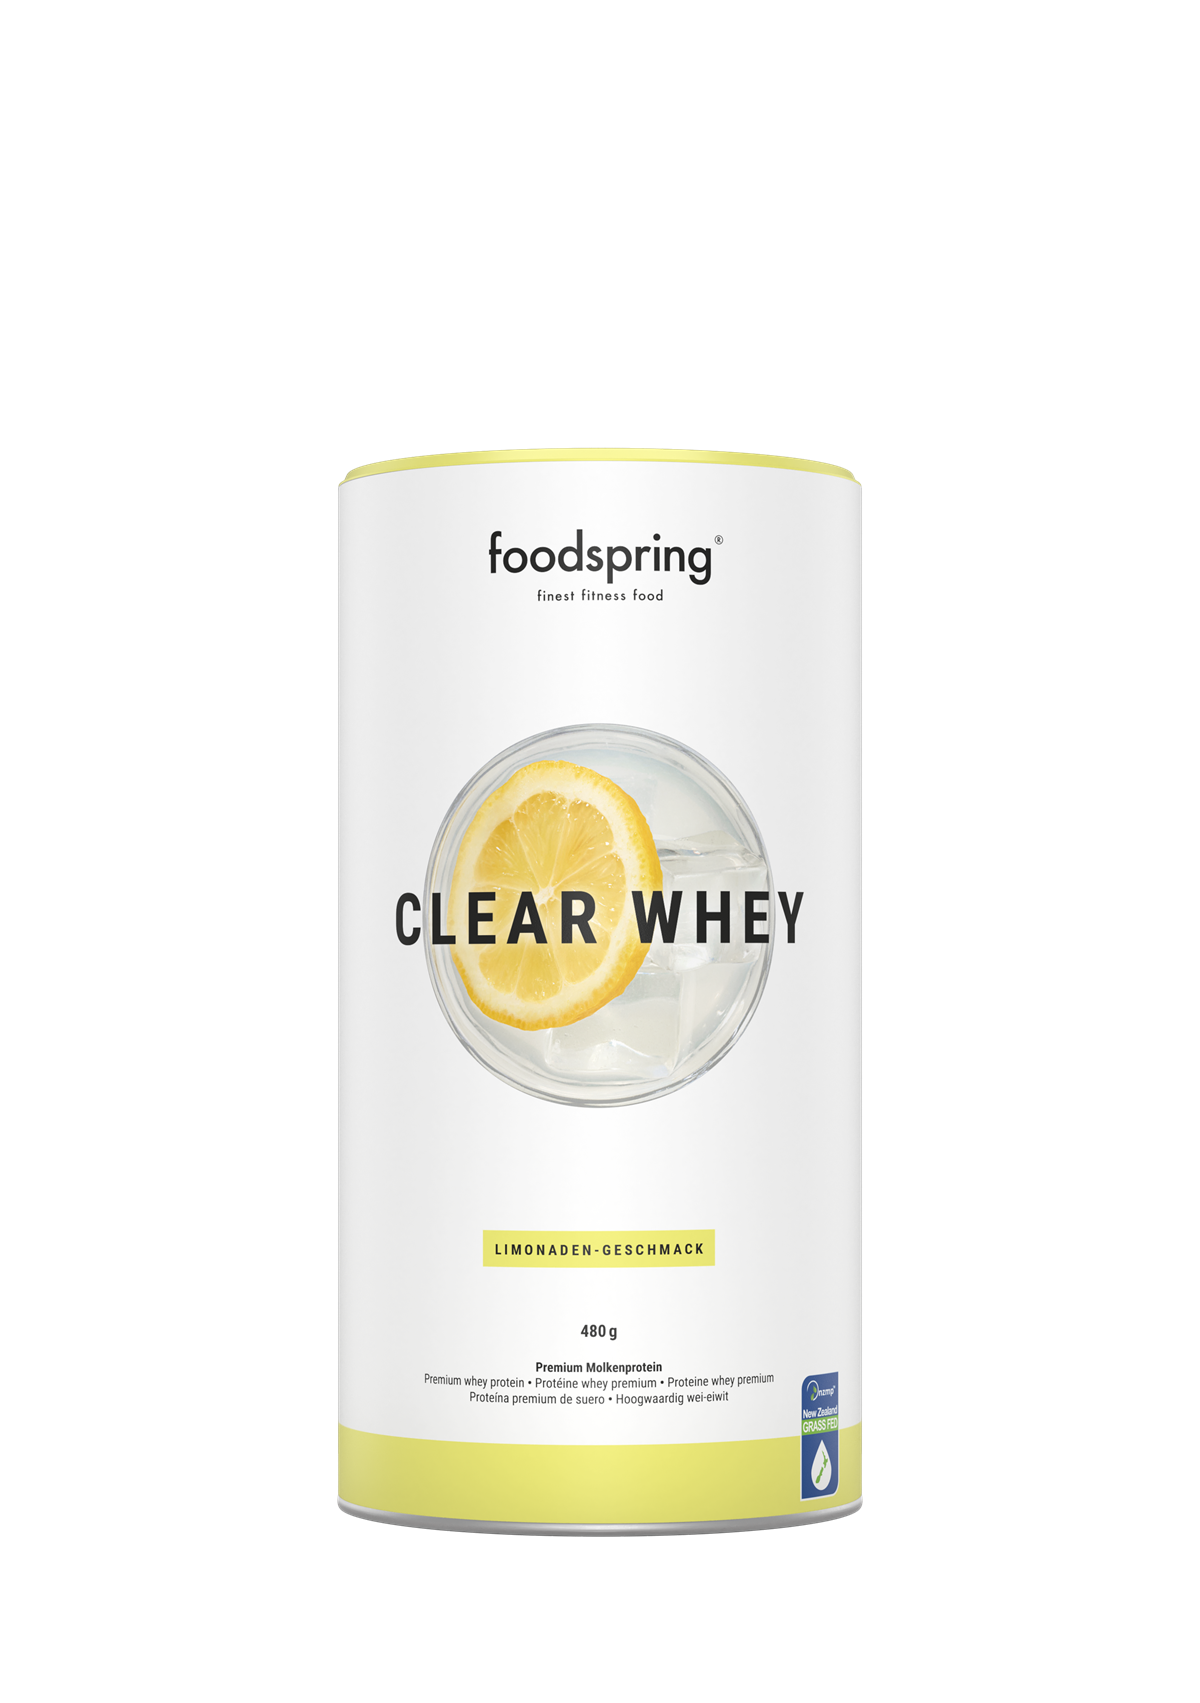 foodspring_Clear Whey Limonade_EUR 29,99